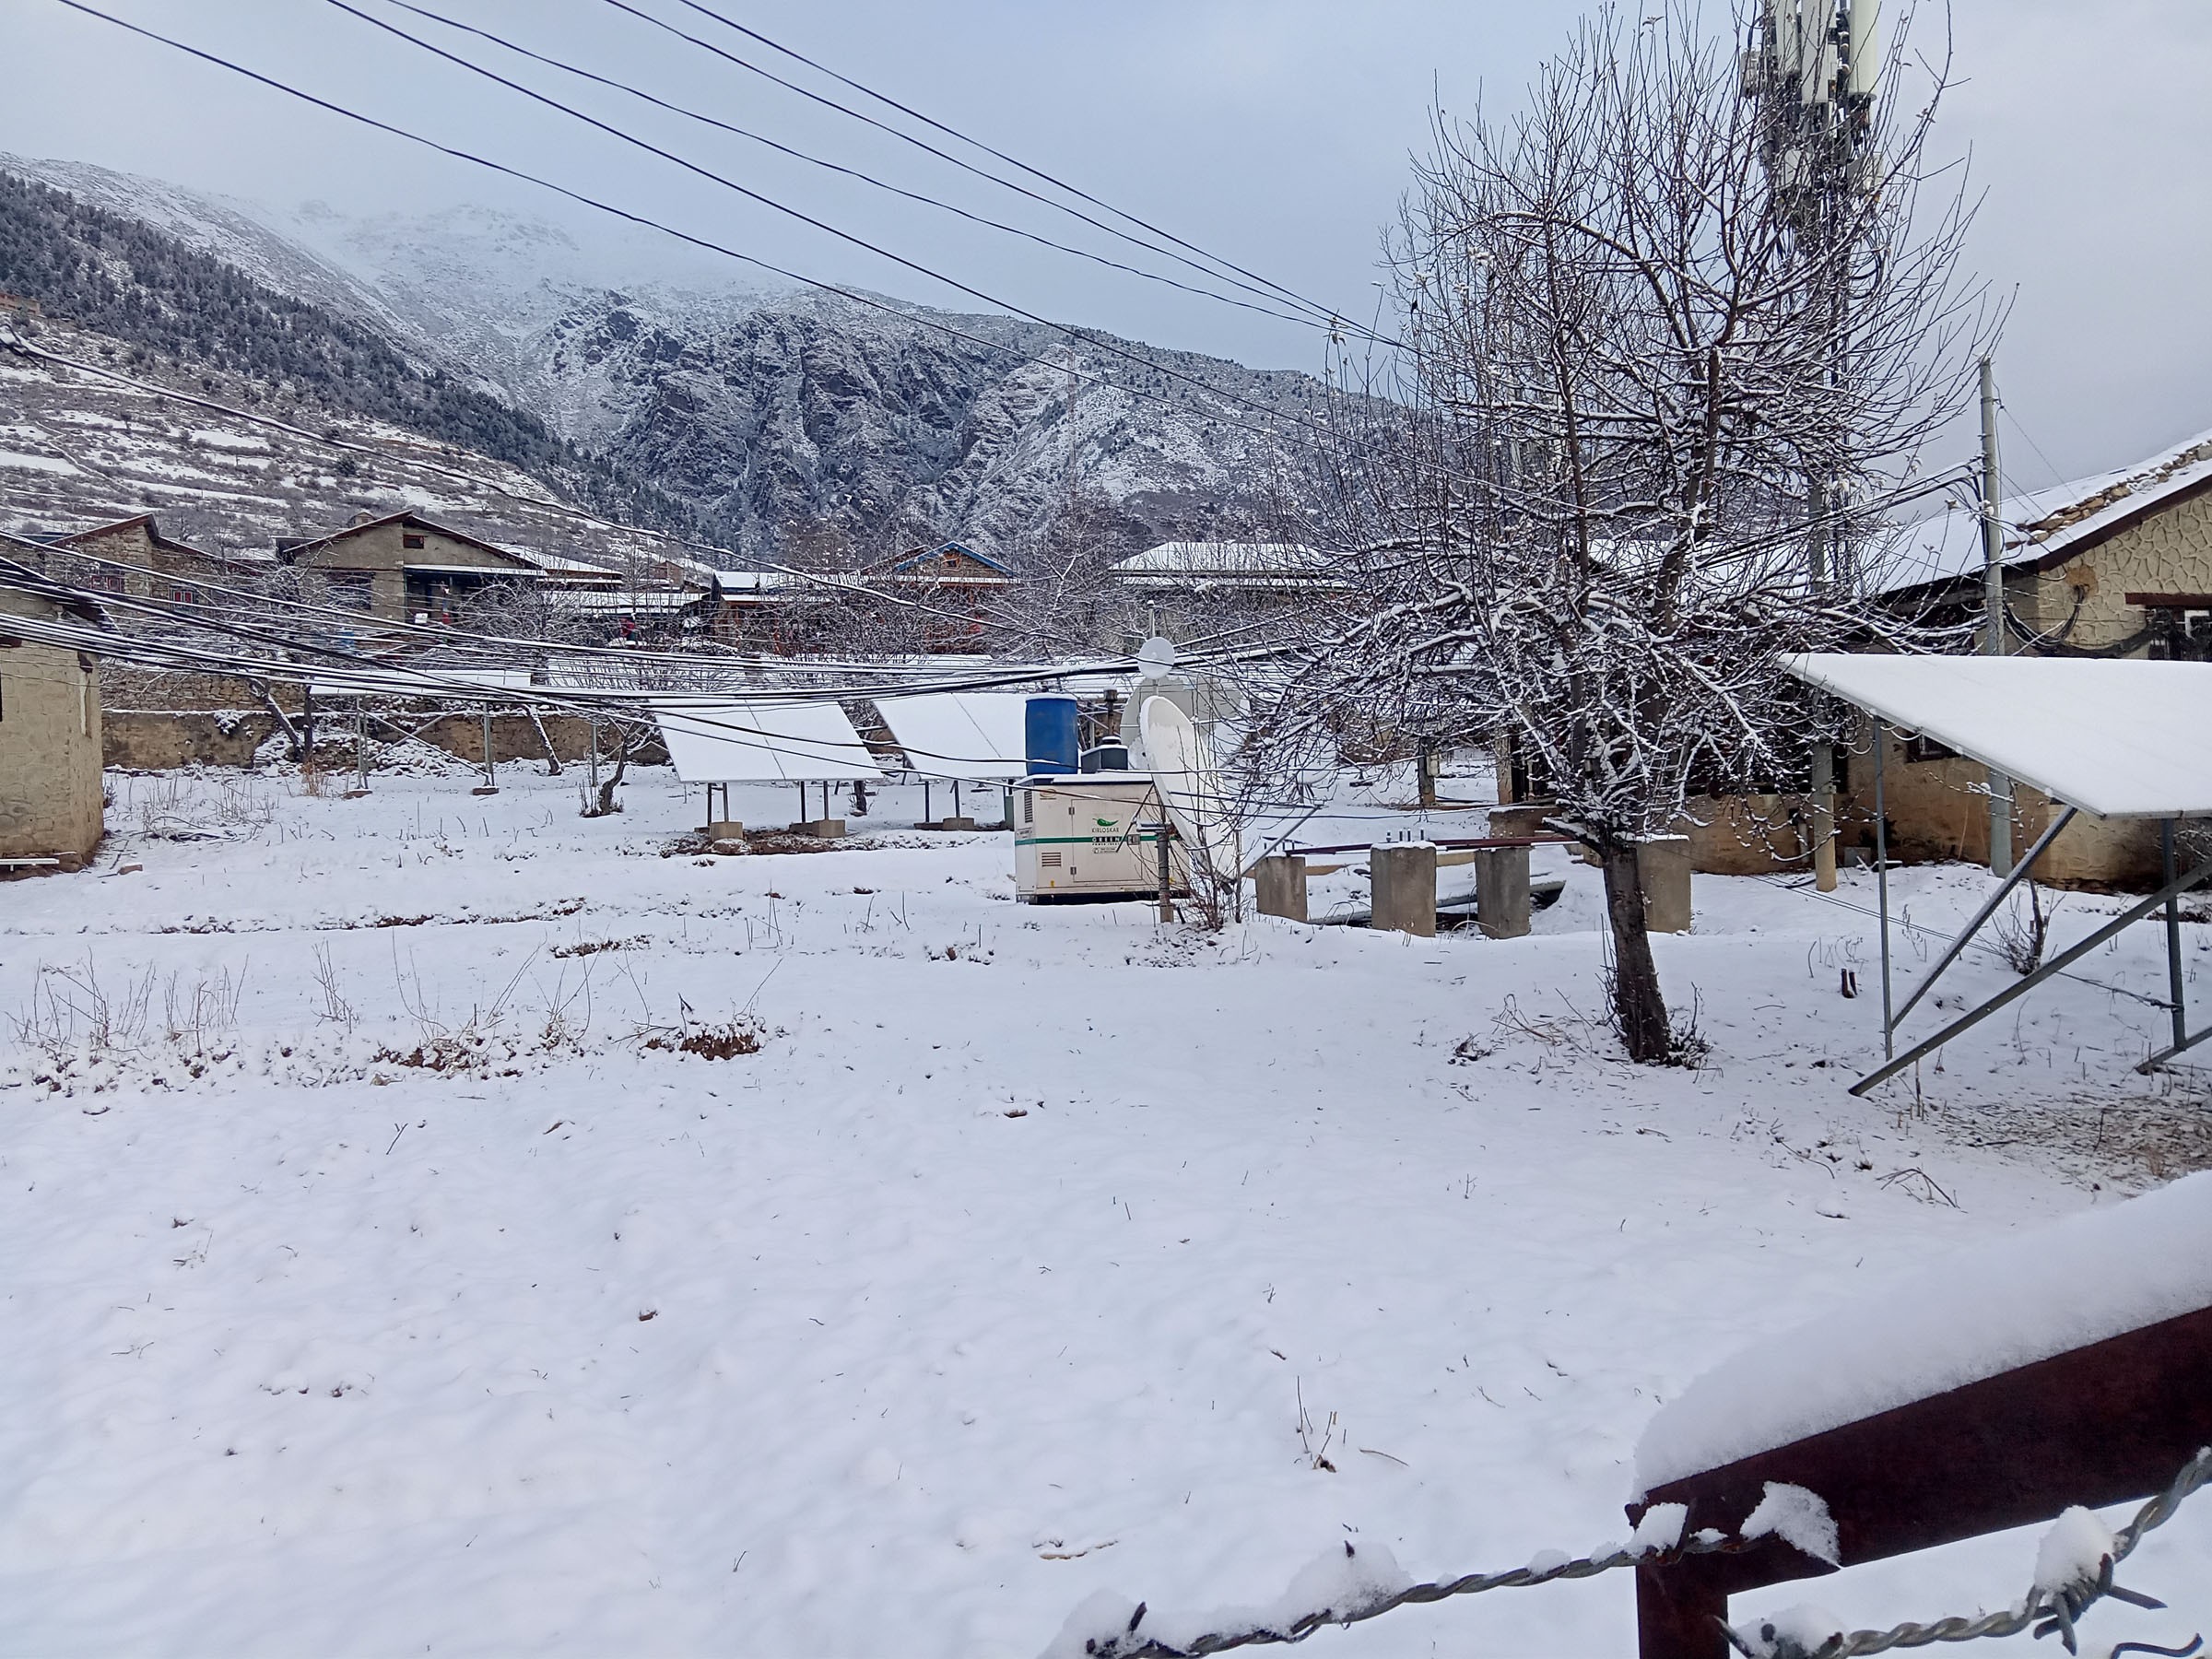 Snowfall in Humla, people's life difficult